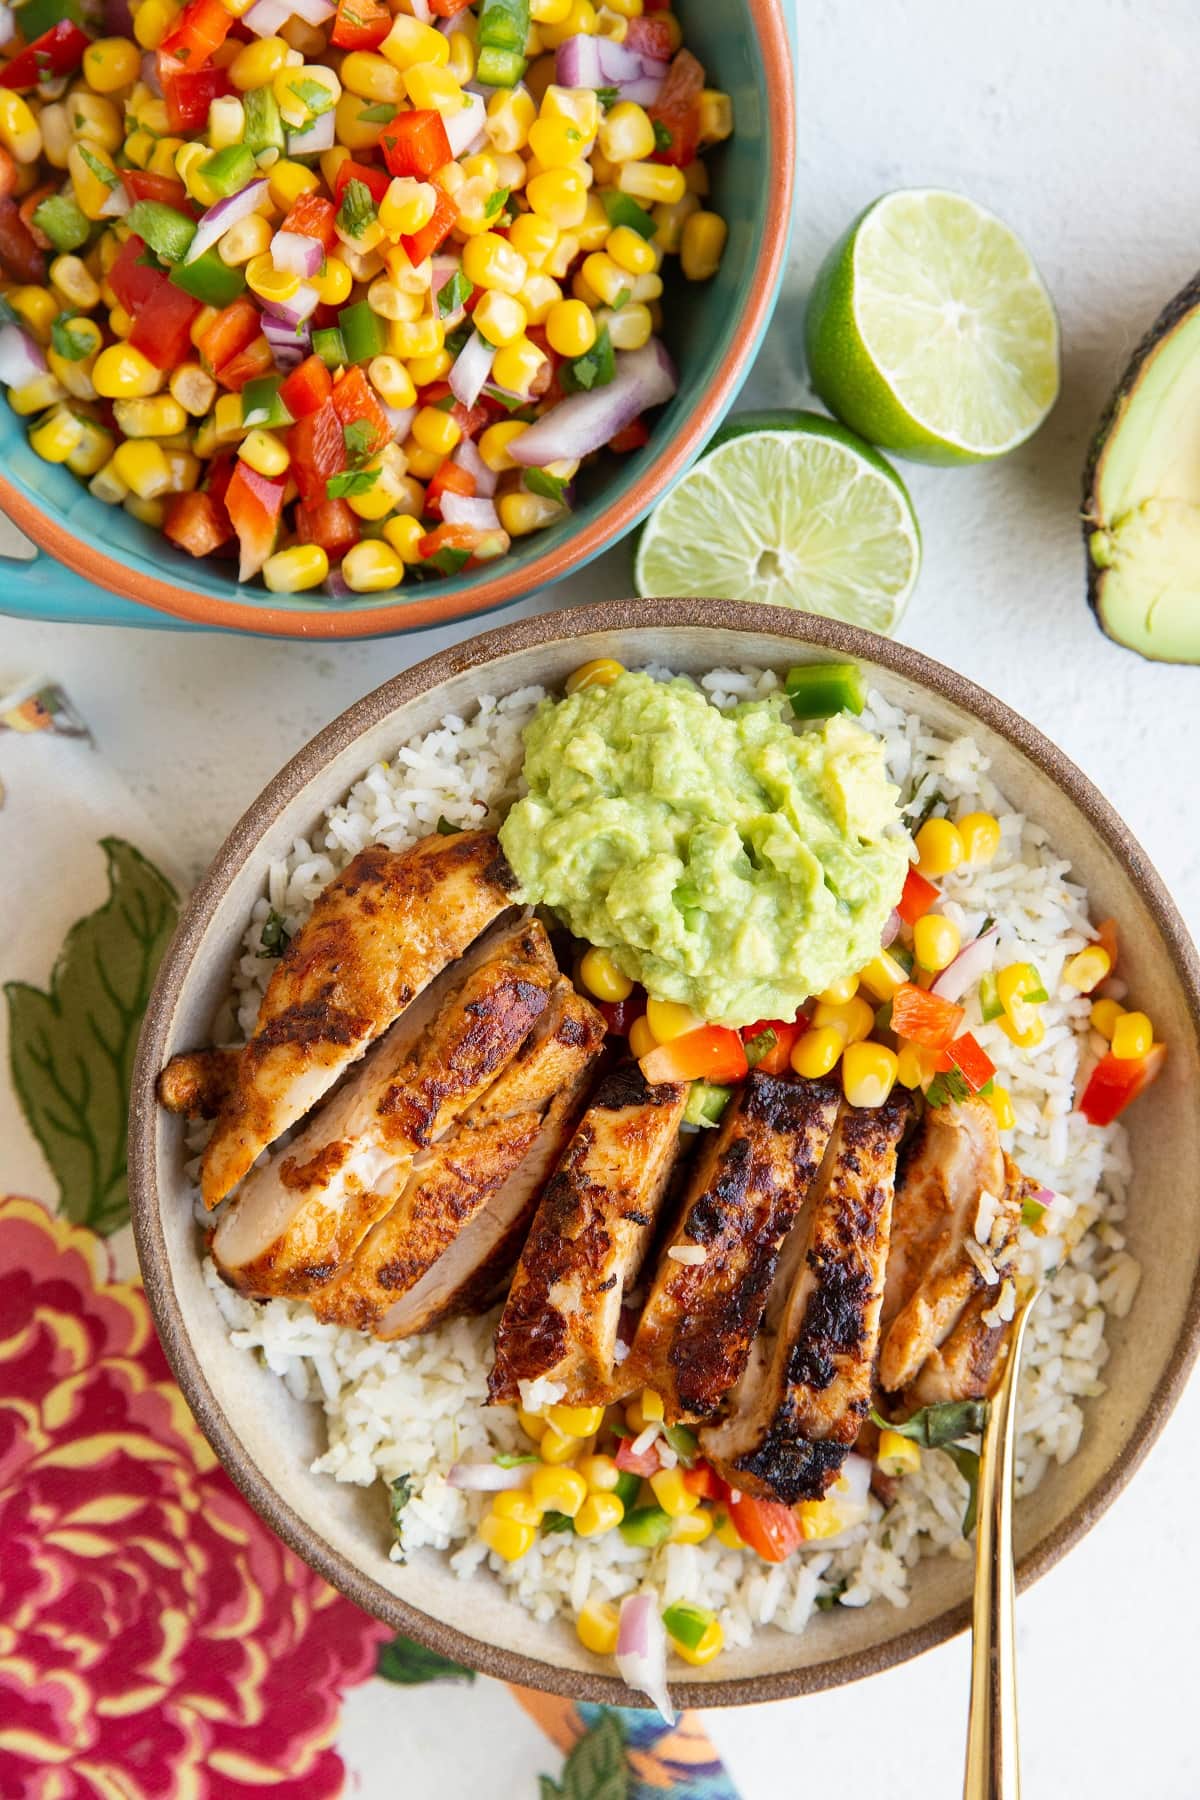 Burrito bowl with chicken, corn salsa and guacamole inside of it with a bowl of corn salsa to the side.